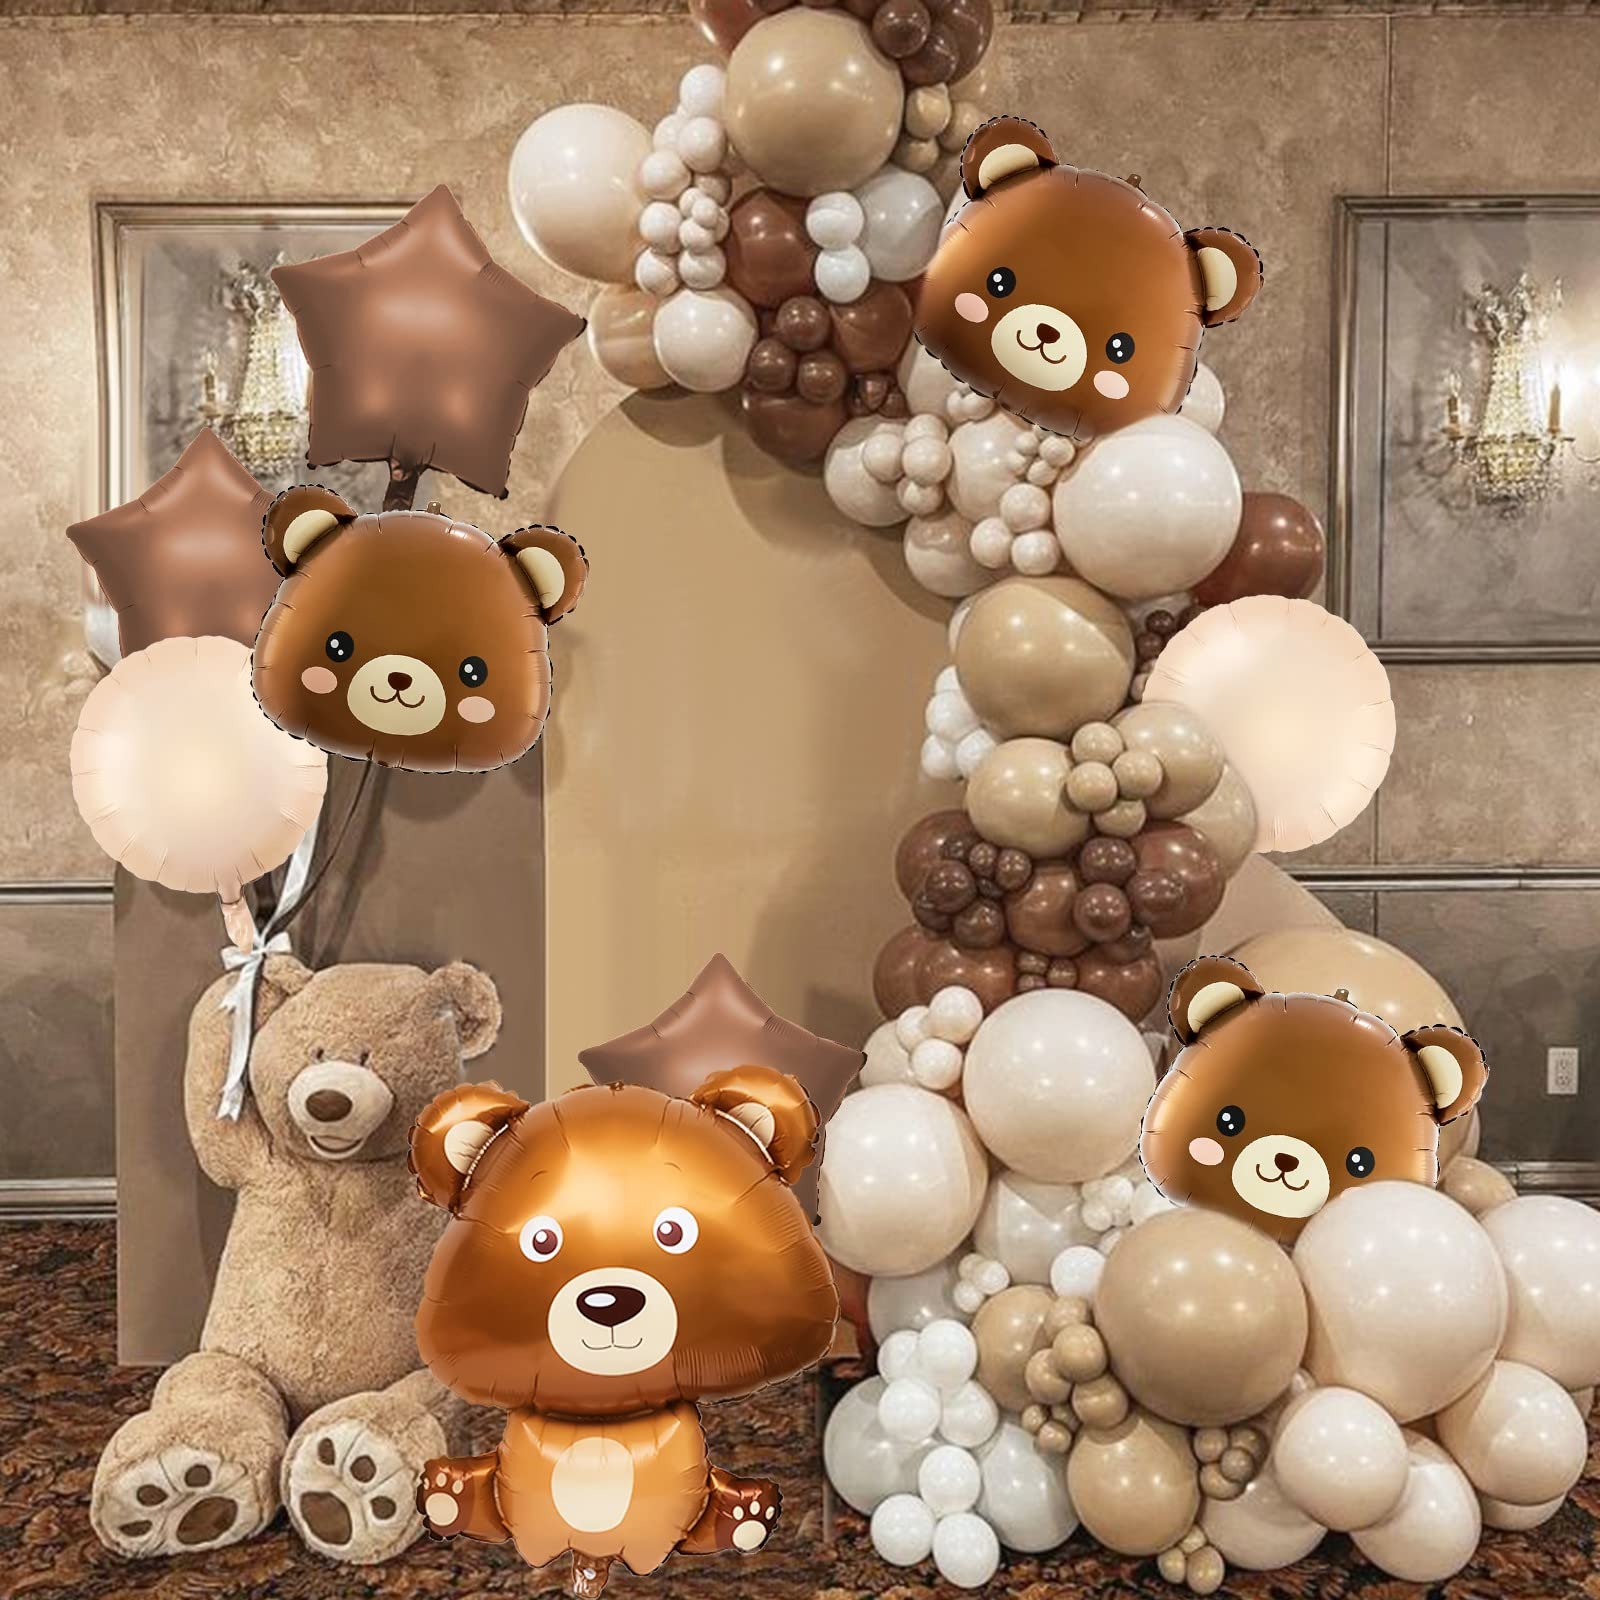 14 Pcs Bear Balloons, Teddy Bear Balloons Baby Shower Decorations Foil Animal Balloons for We Can Bearly Waits Theme Birthday Party Decor Supplies